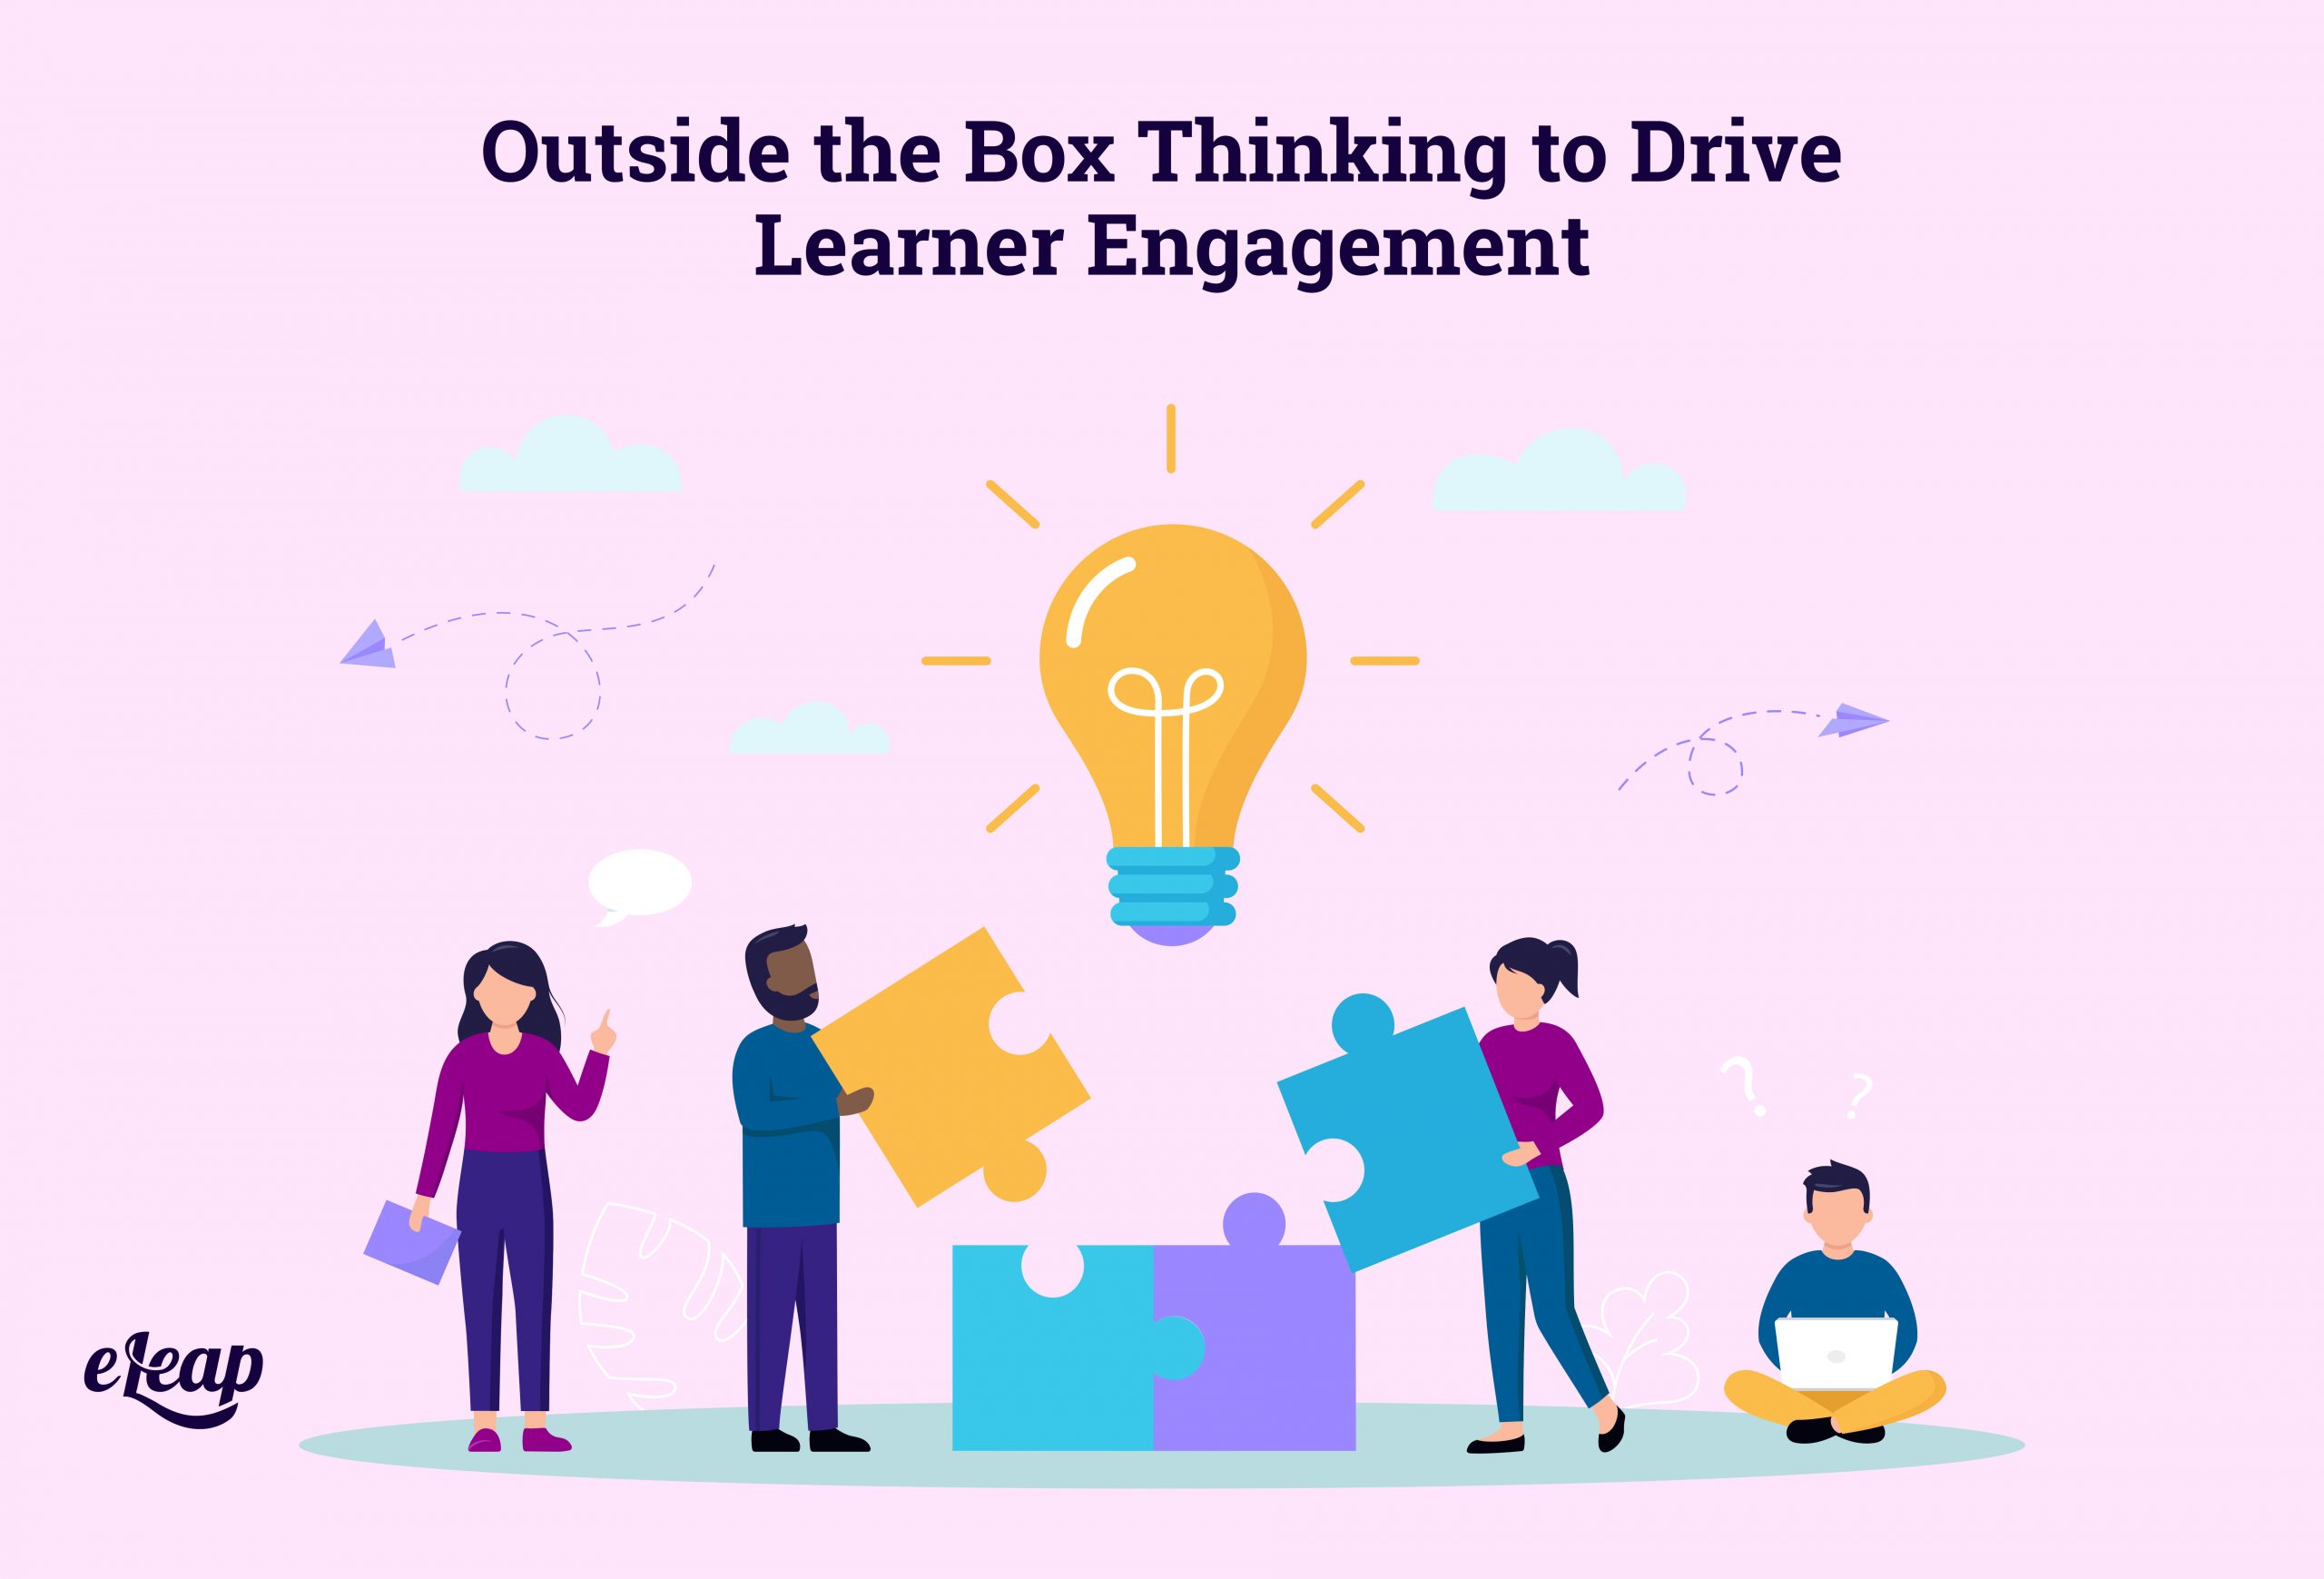 Outside the Box Thinking to Drive Learner Engagement